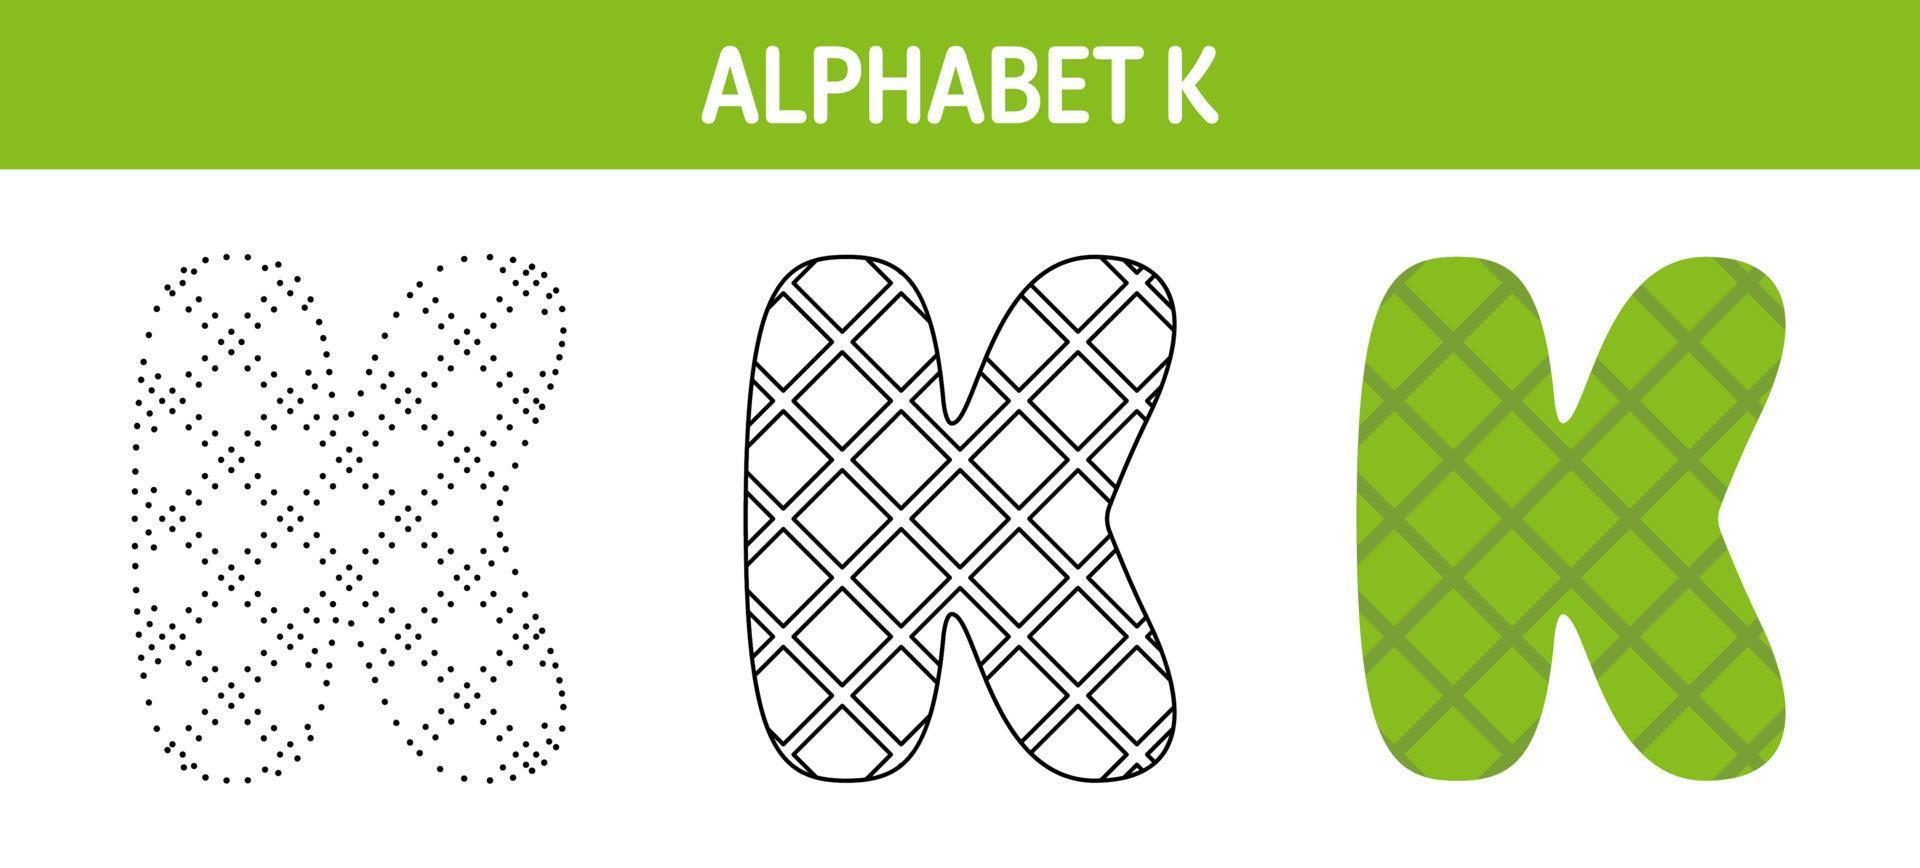 Alphabet K tracing and coloring worksheet for kids vector